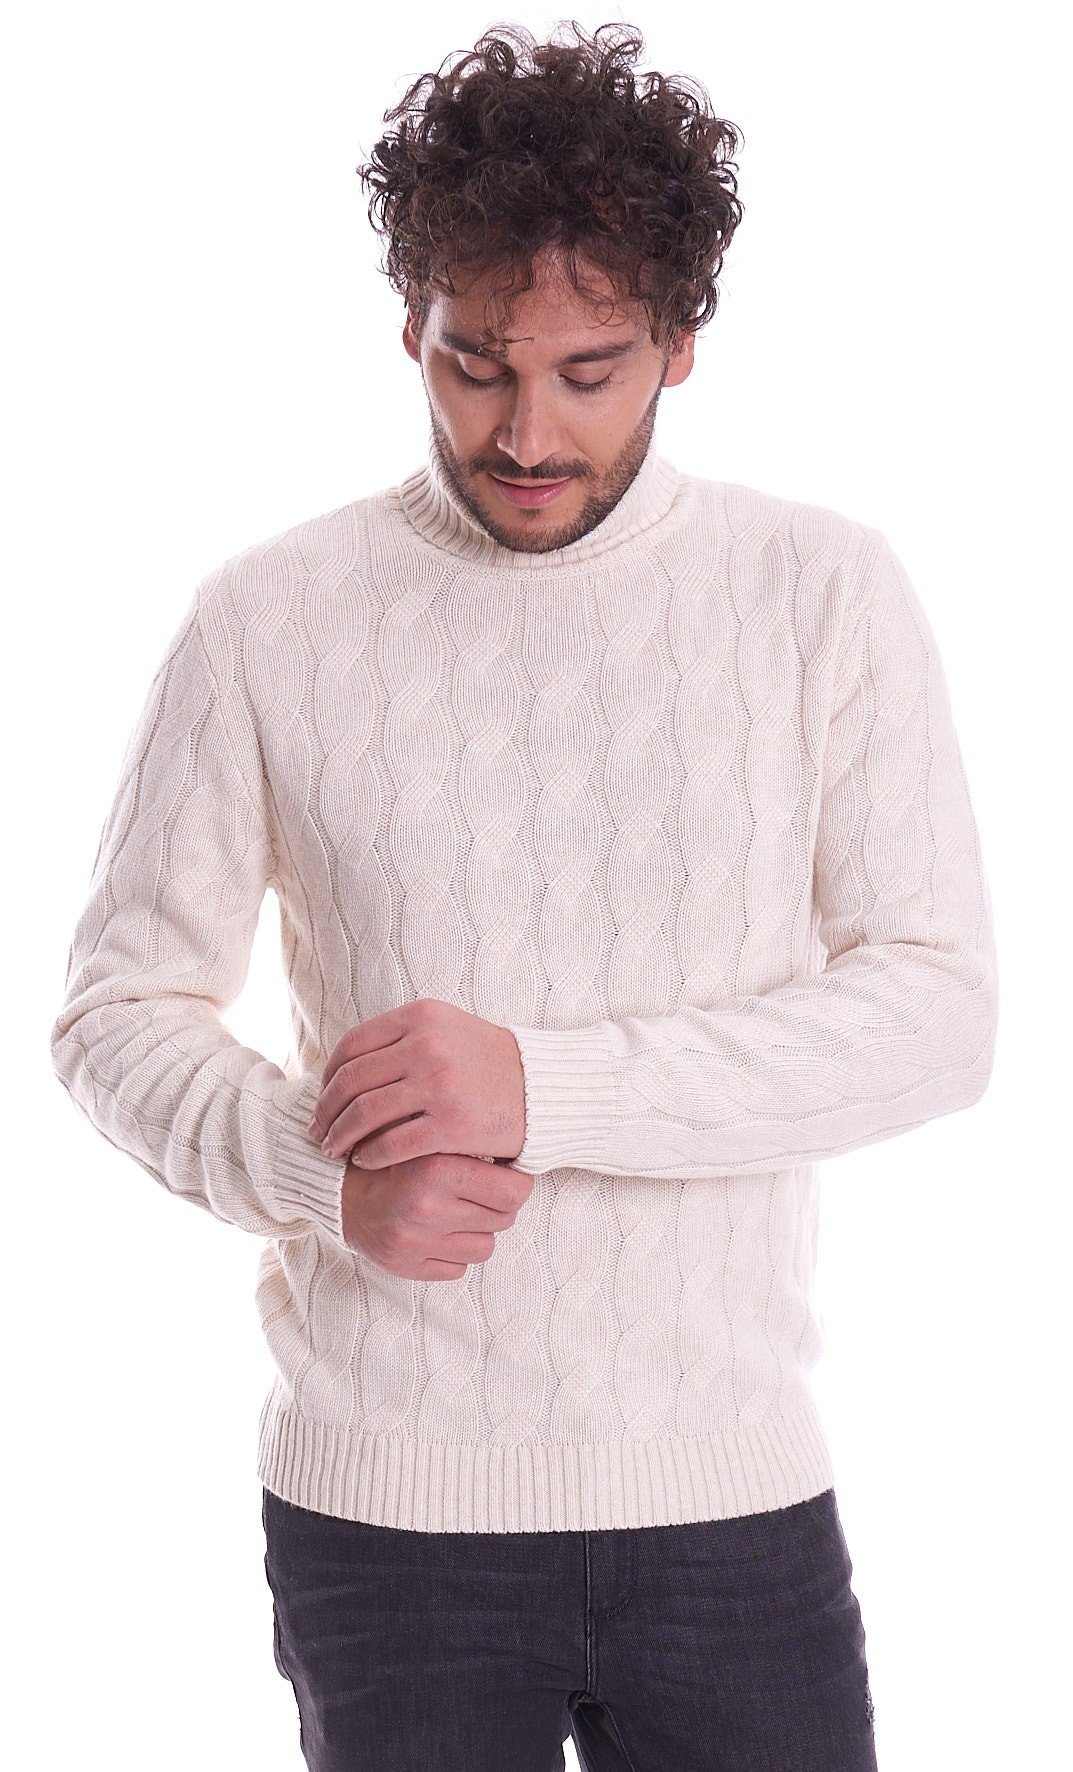 Men's warm woven high neck sweater | Made in Italy